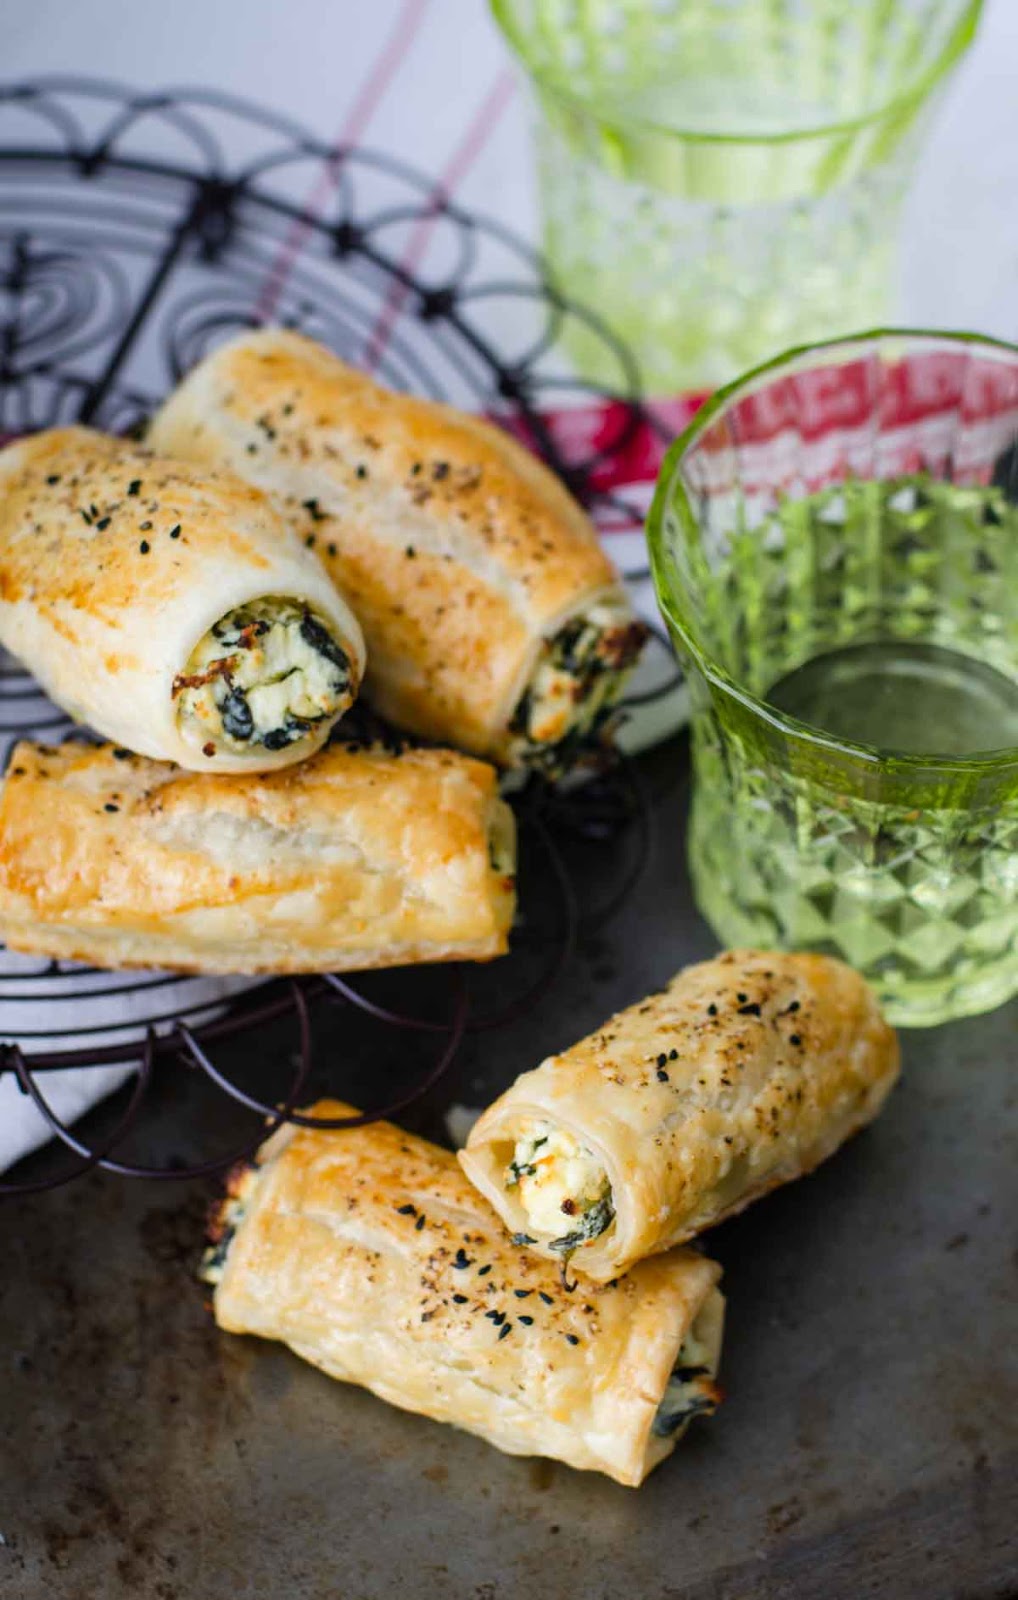 How to Bake Spinach Feta Ricotta Rolls